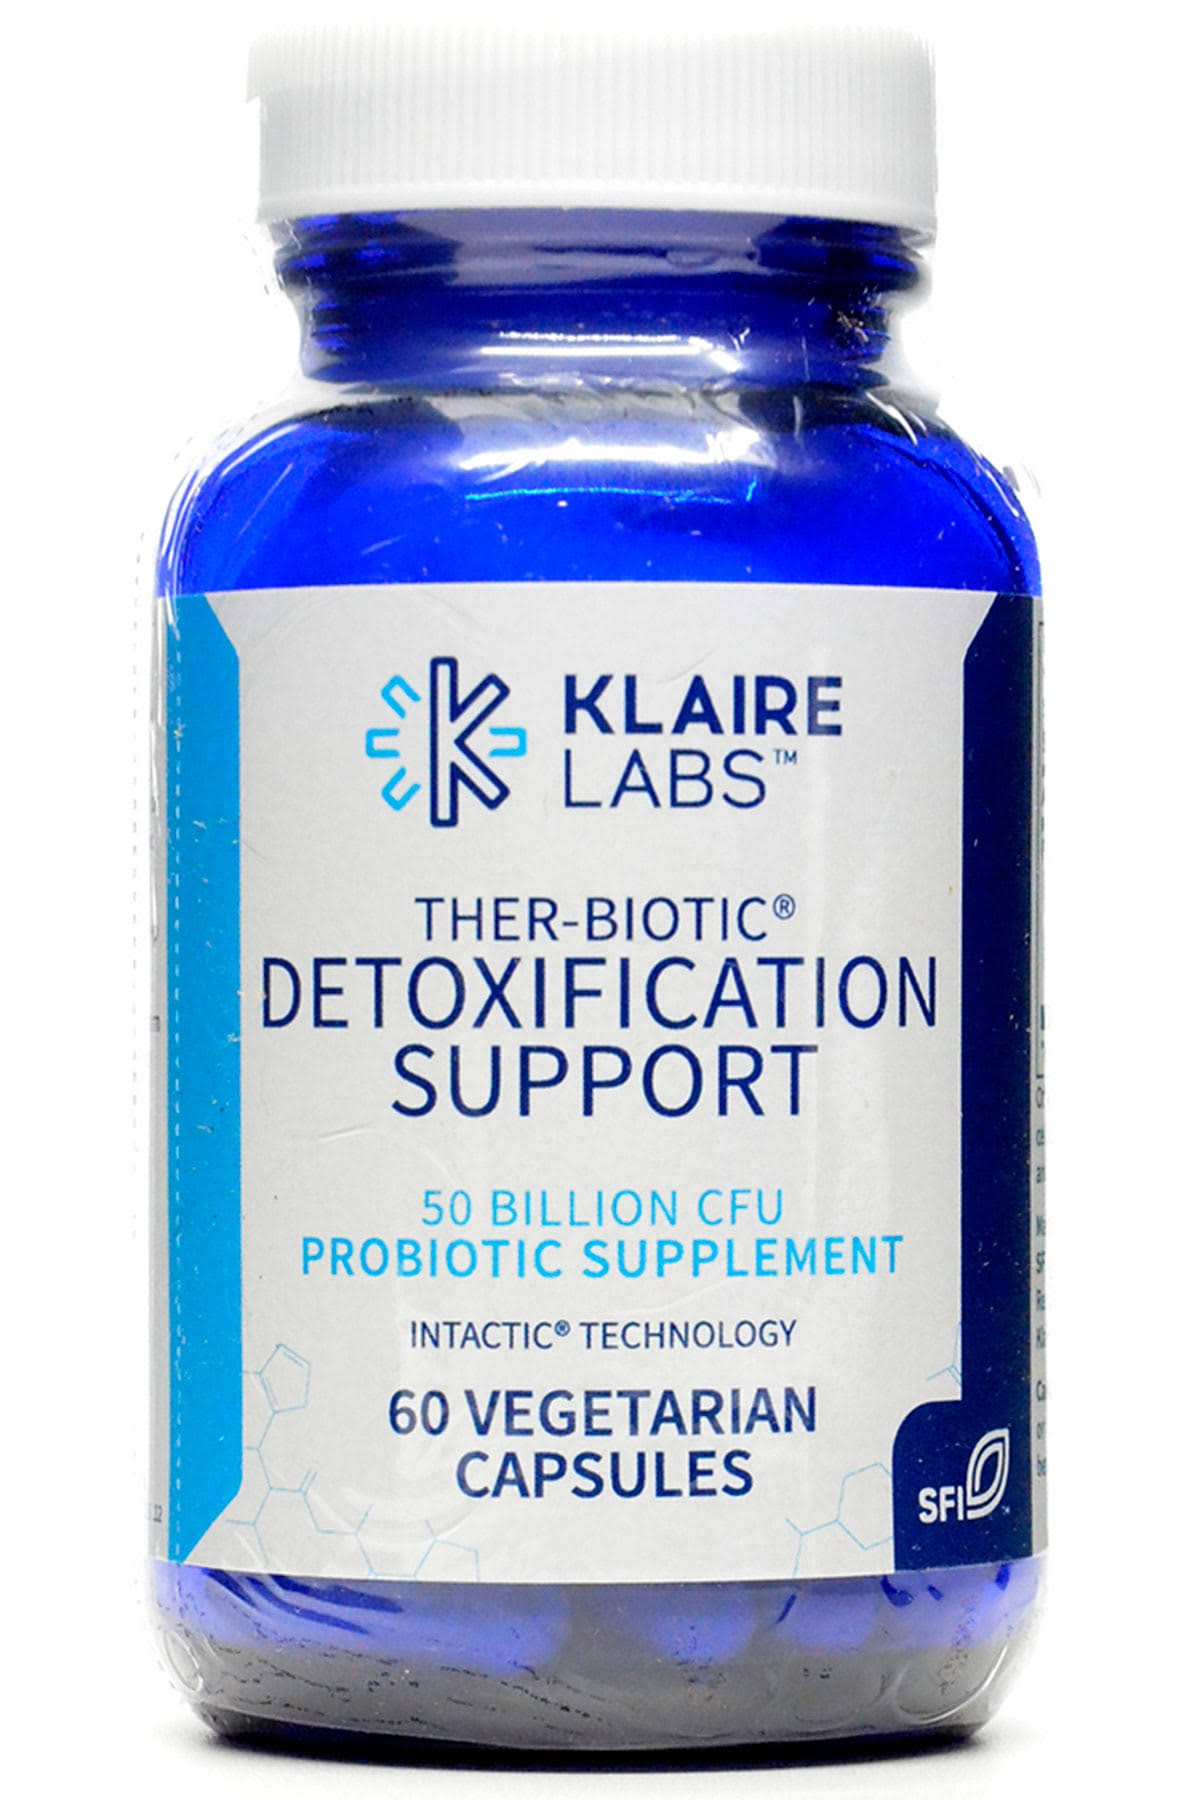 Klaire Labs - Ther-Biotic Detoxification Support - 60 Capsules